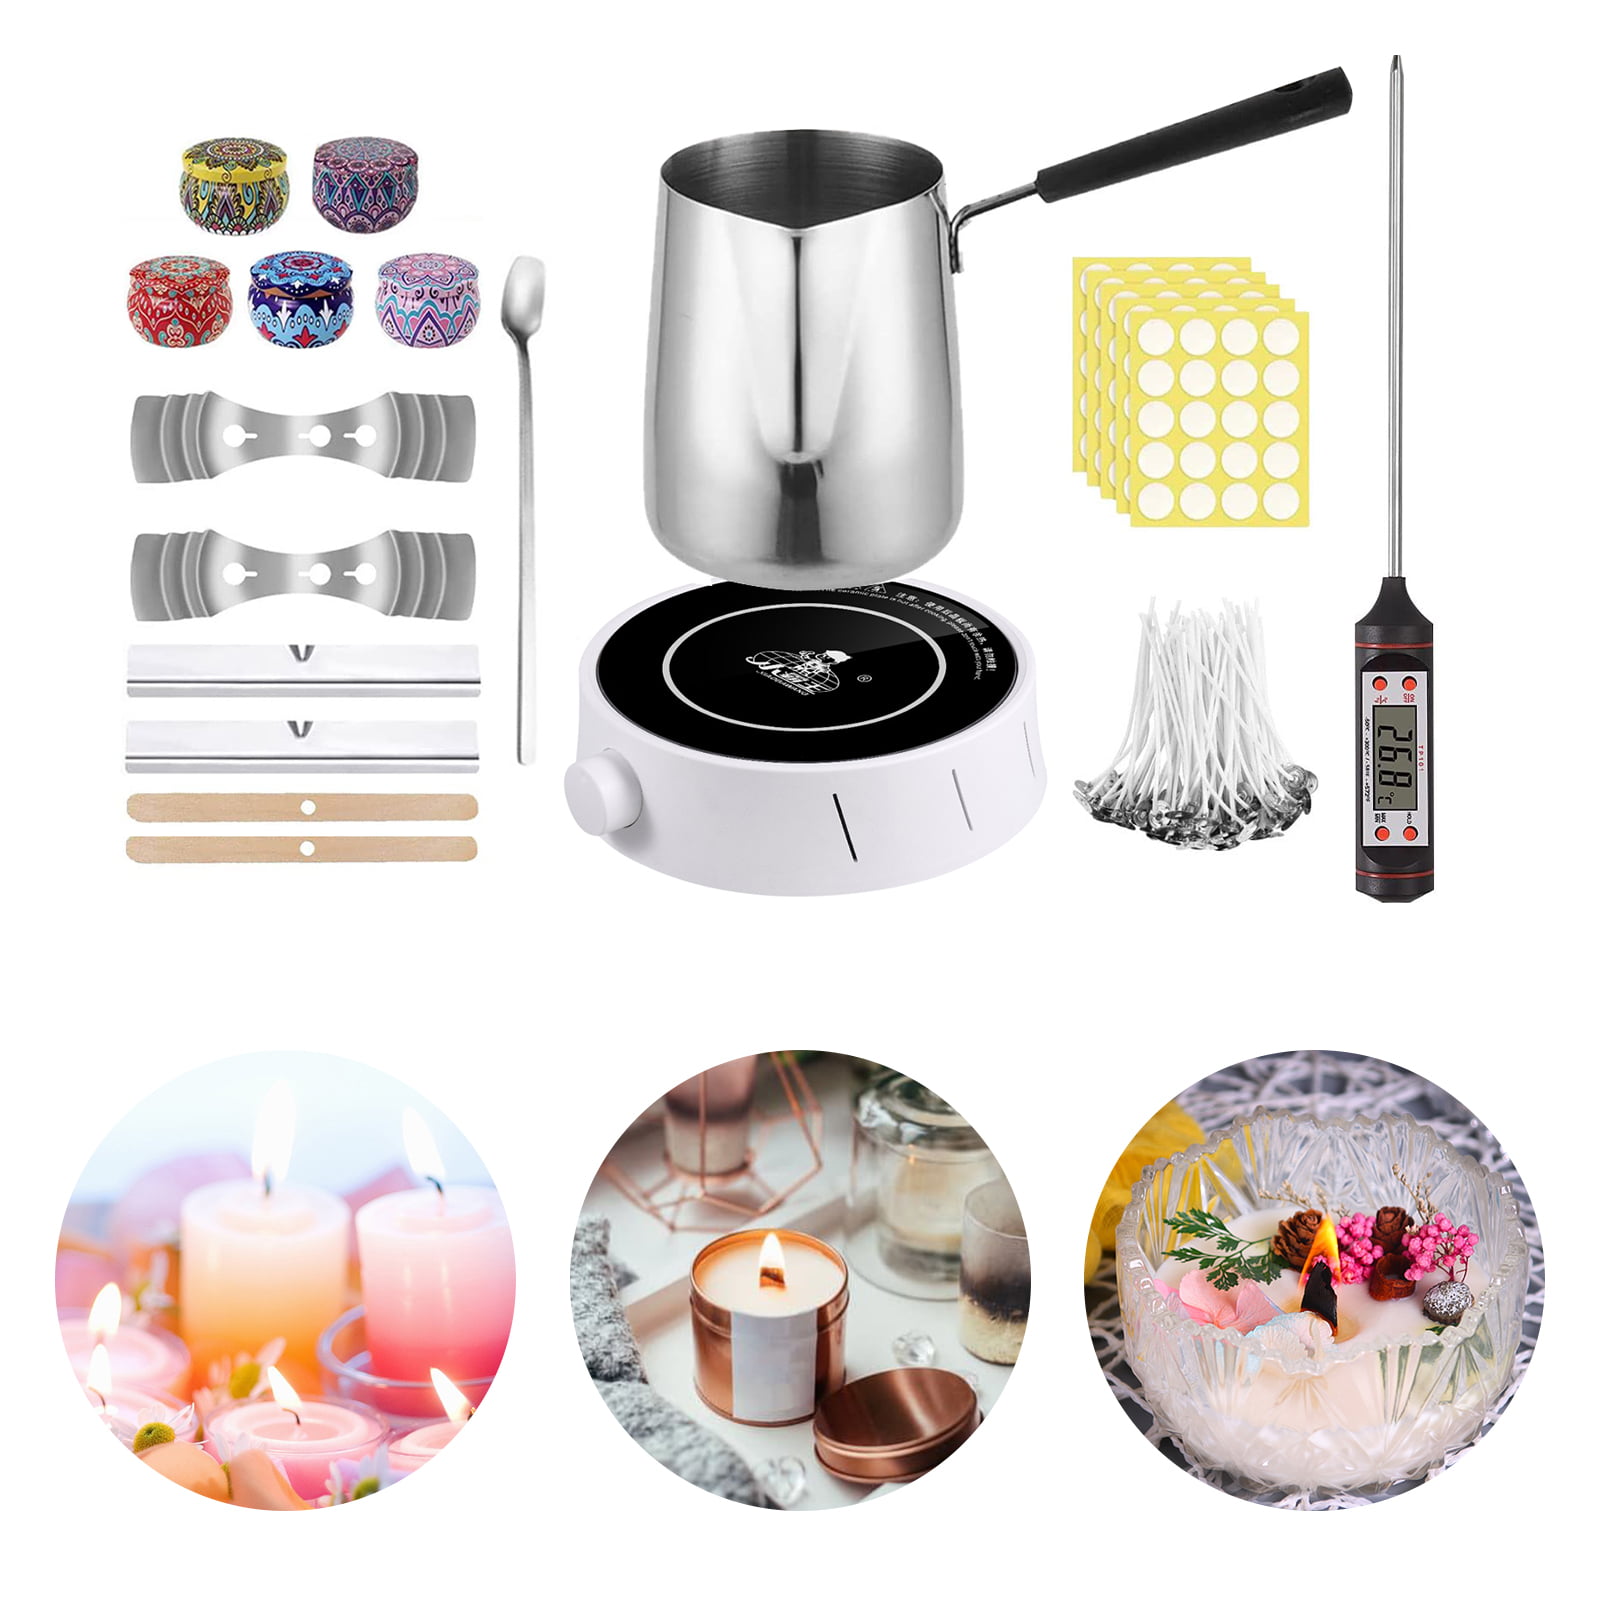 TongWey Candle Making Supplies Kit with Electronic Hot Plate, DIY Candle  Maker for Beginners, Adults, with Melting Pot, Soy Wax, Spoon, Cotton  Wicks